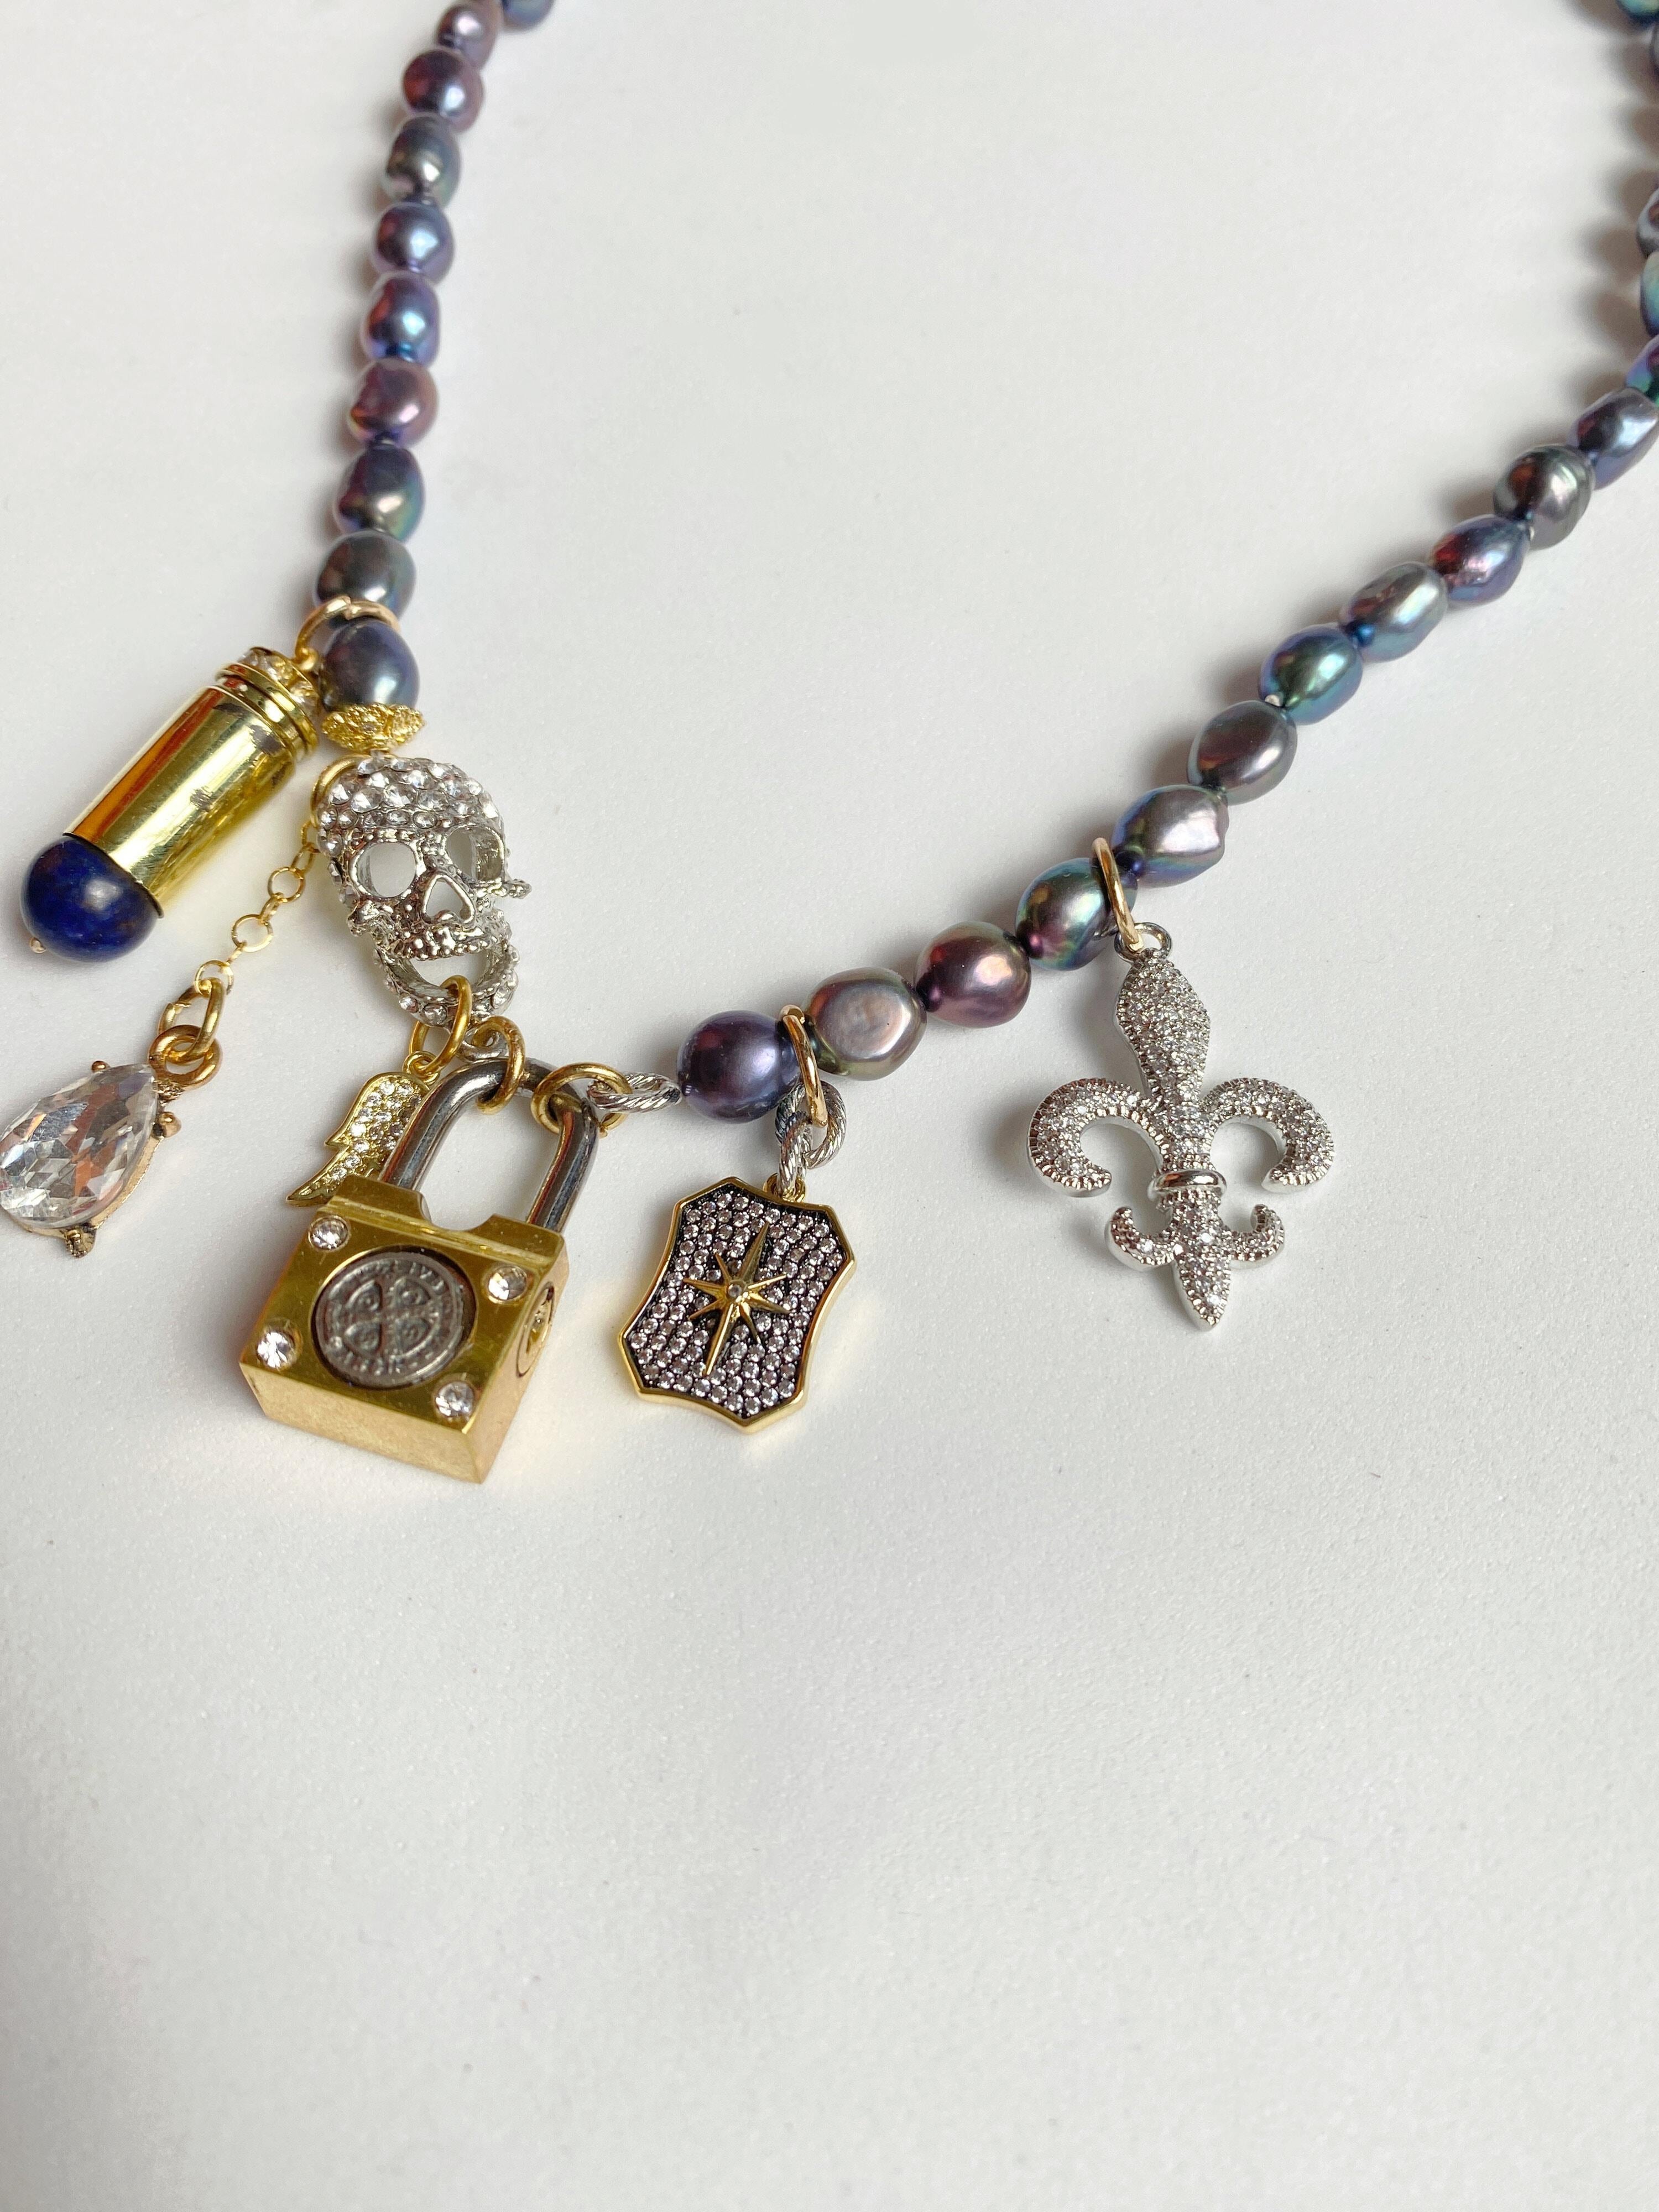 These pearl and lock necklaces are all custom made, making each one completely unique. You can customize from white to black pearl, each gold filled lock is engraved with the owners initials, and set with your choice of charms depending on your